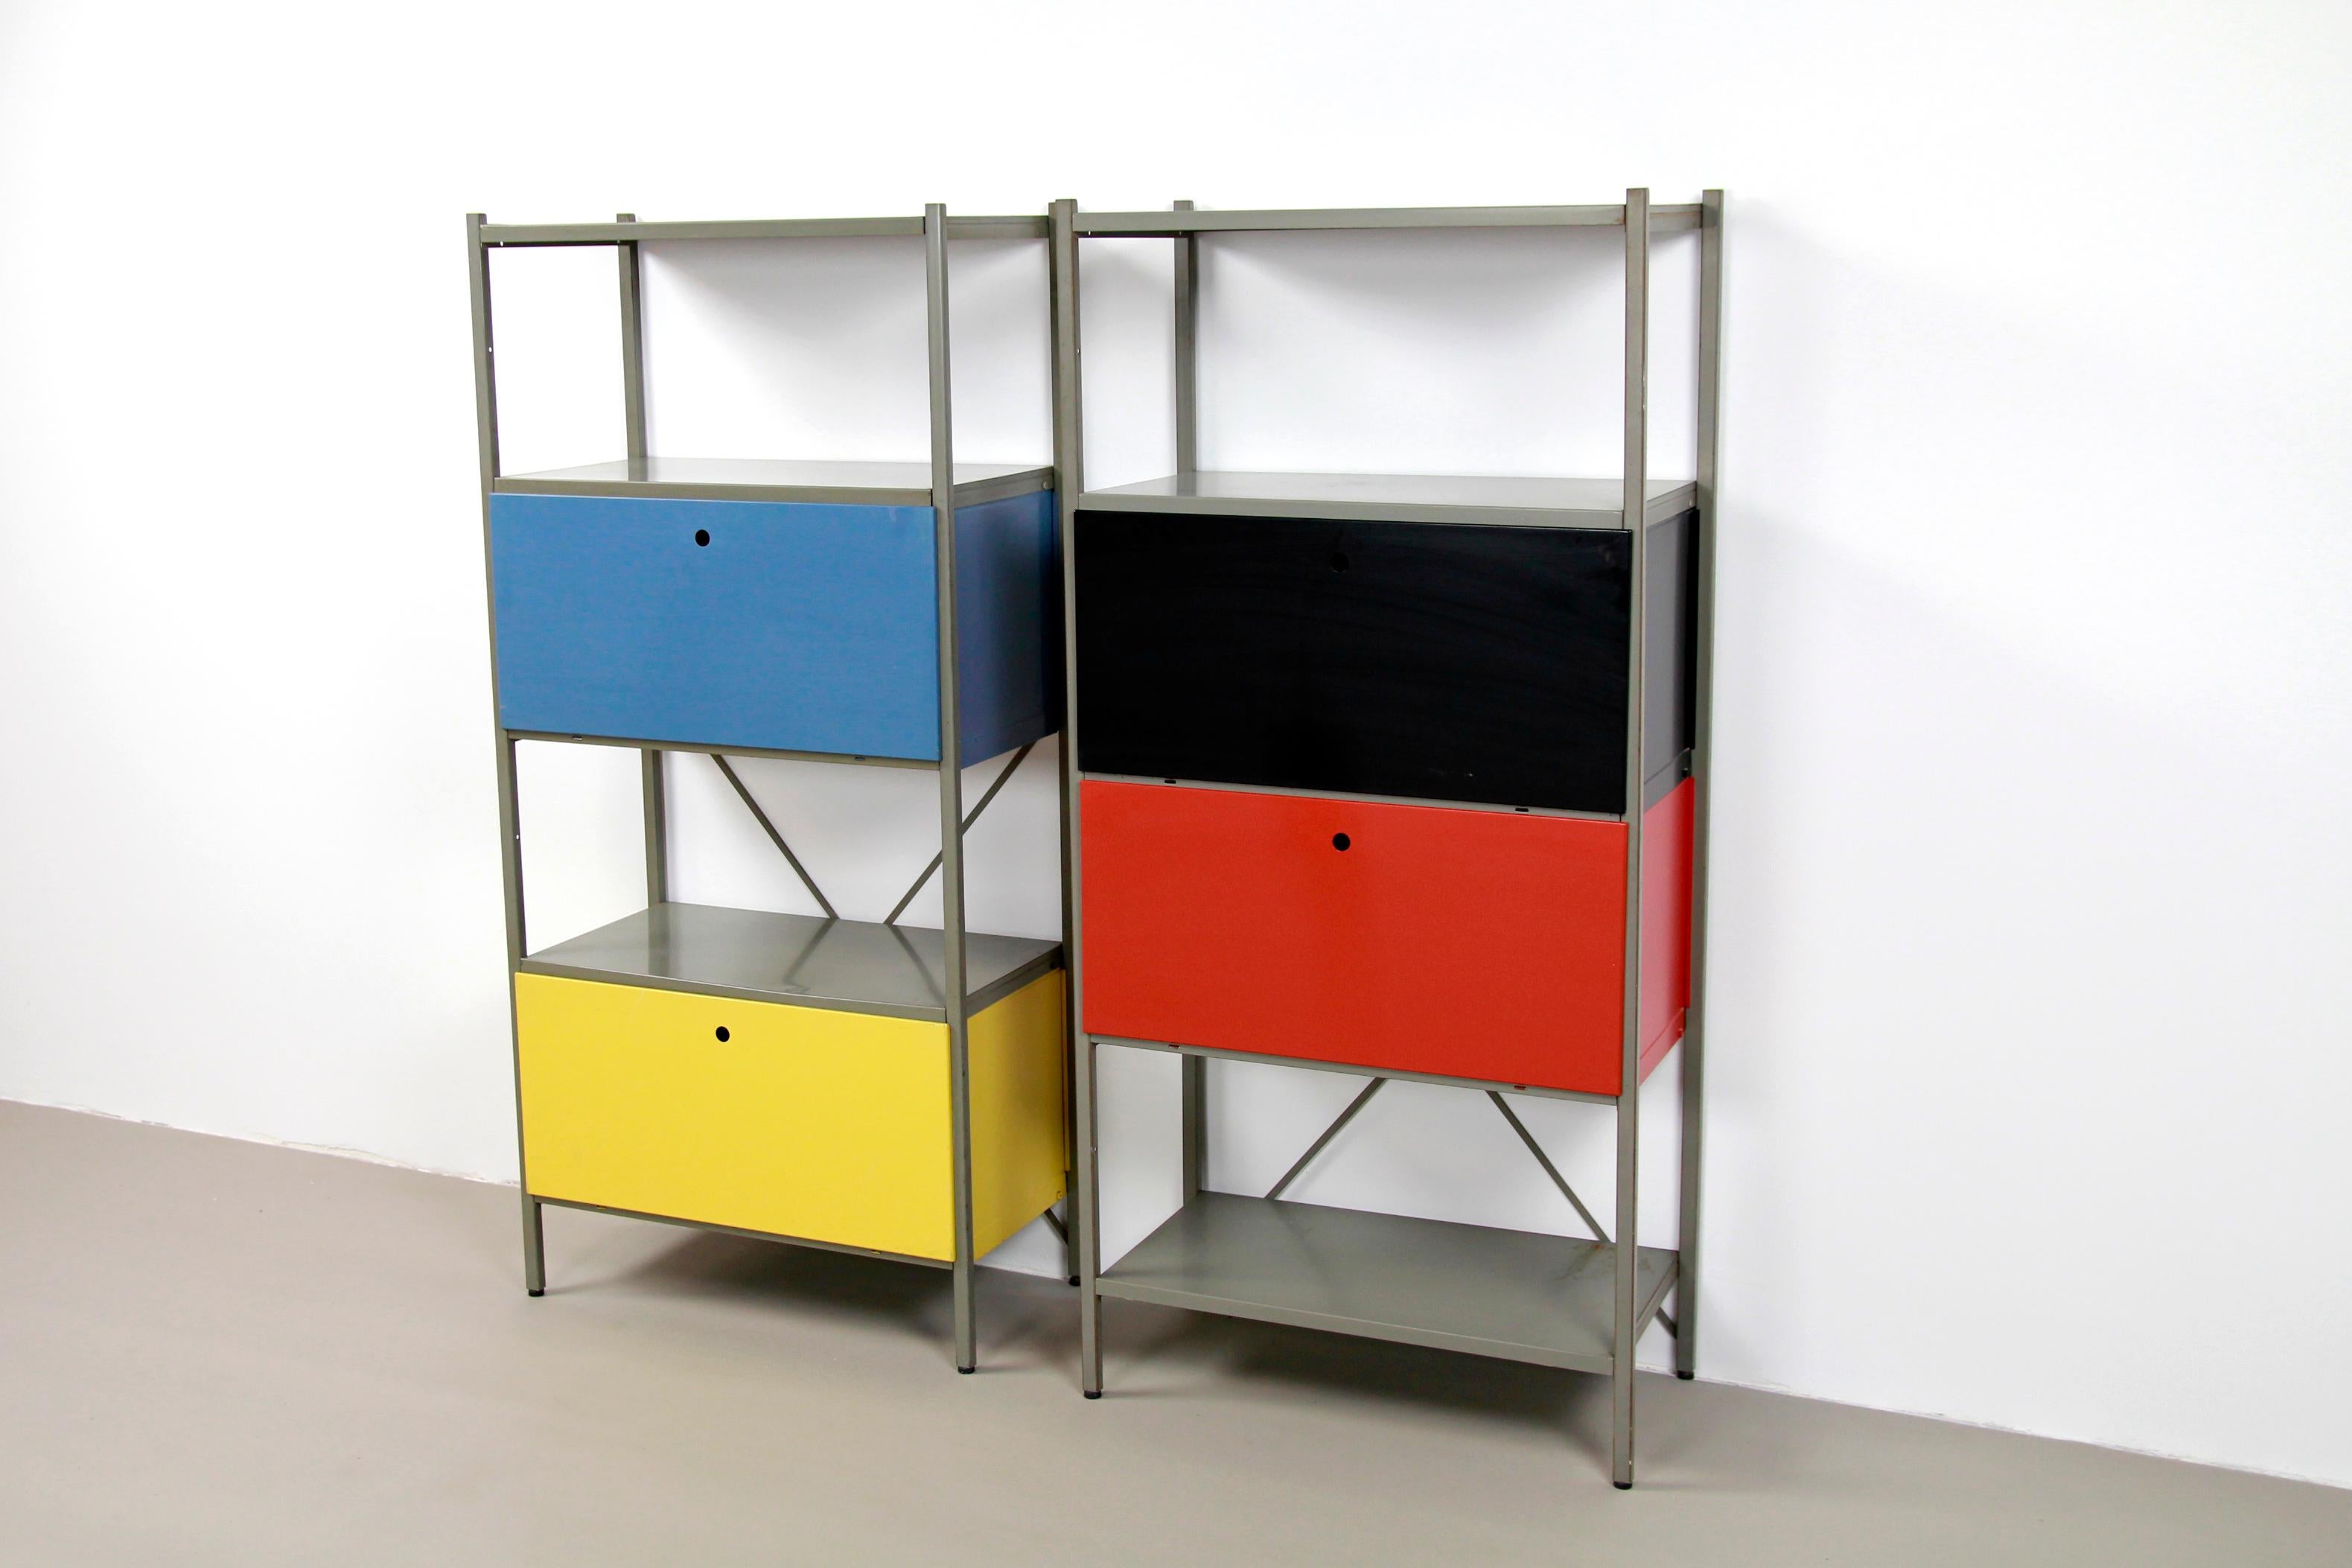 Beautiful modular cabinet designed by Wim Rietveld (son of Gerrit Rietveld) and manufactured by Gispen, The Netherlands. This wall cabinet is made of lacquered sheet steel. With the help of yokes, shelves, cover plates + doors, a wall unit could be